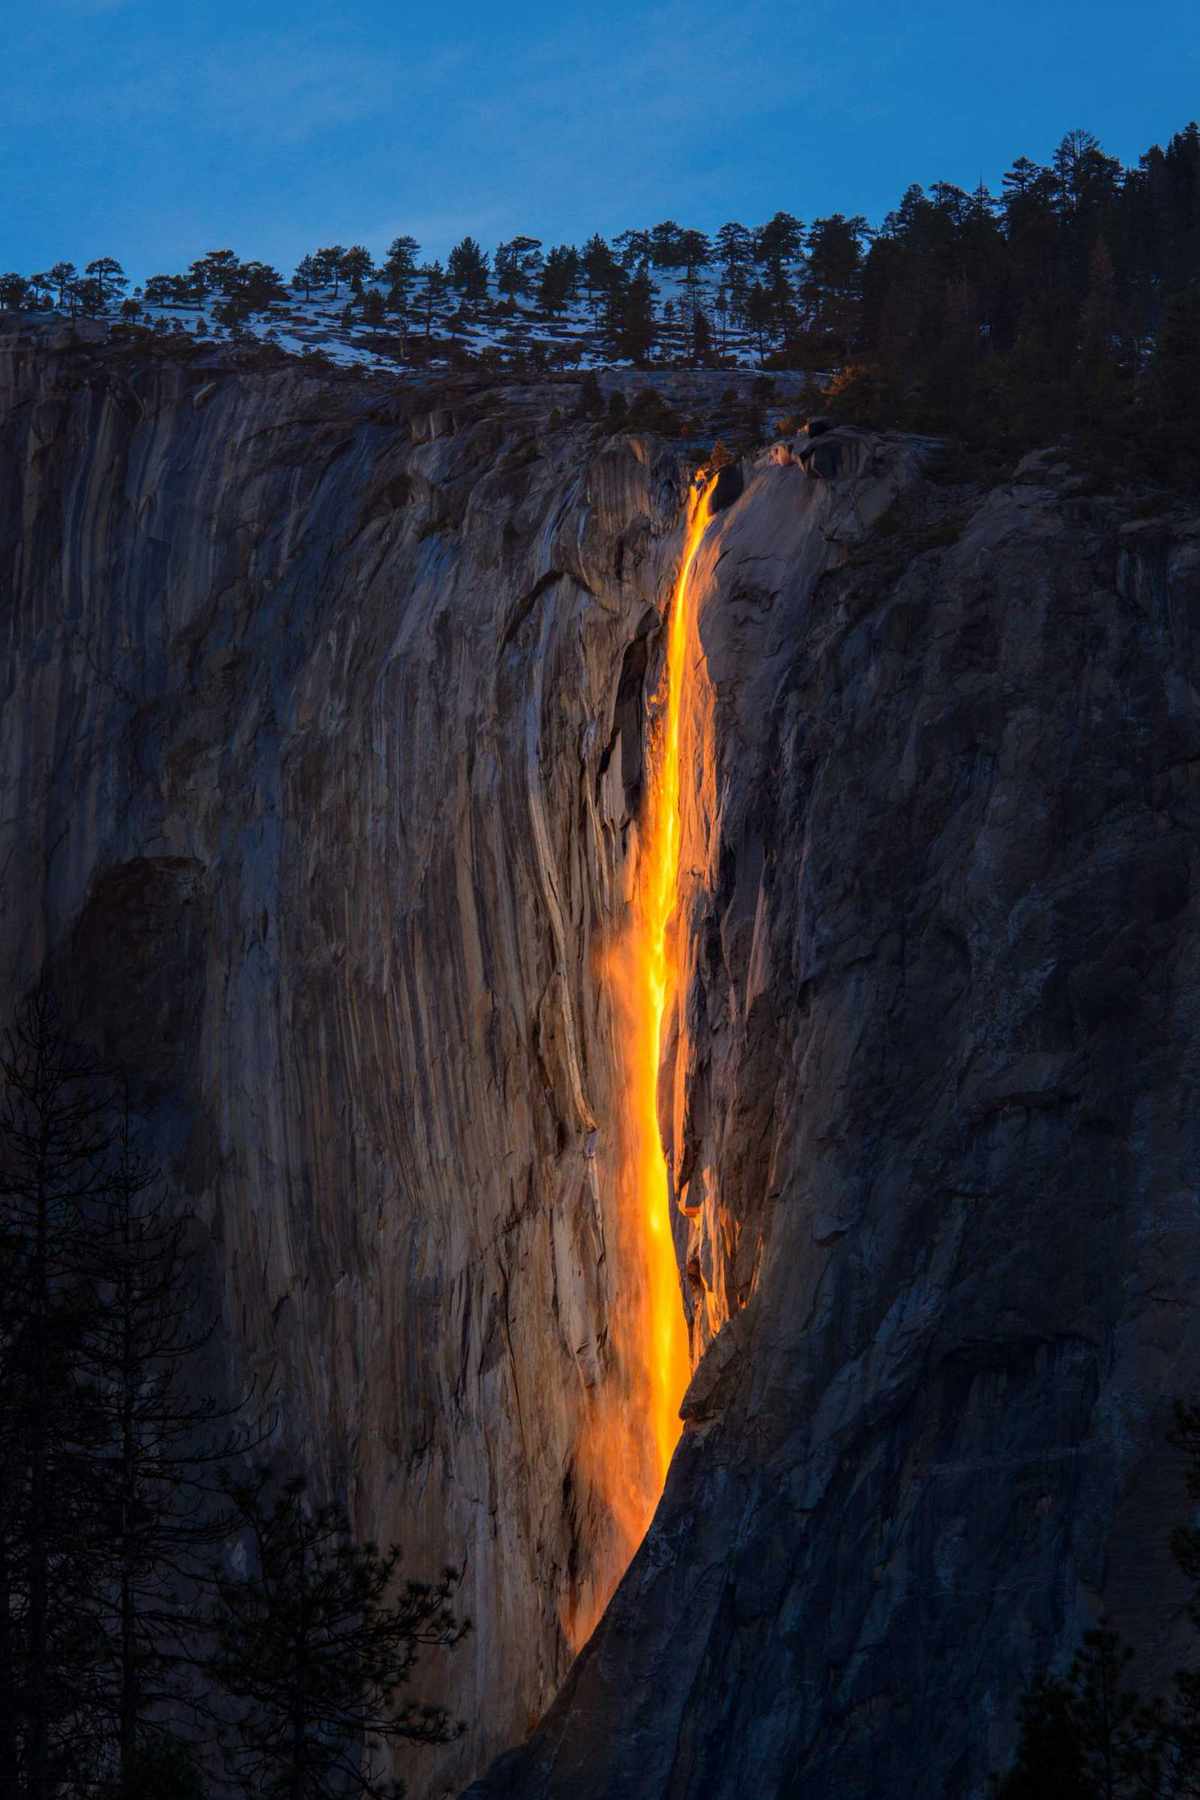 A photo of the firefall at Yosemite National Park from prior years.